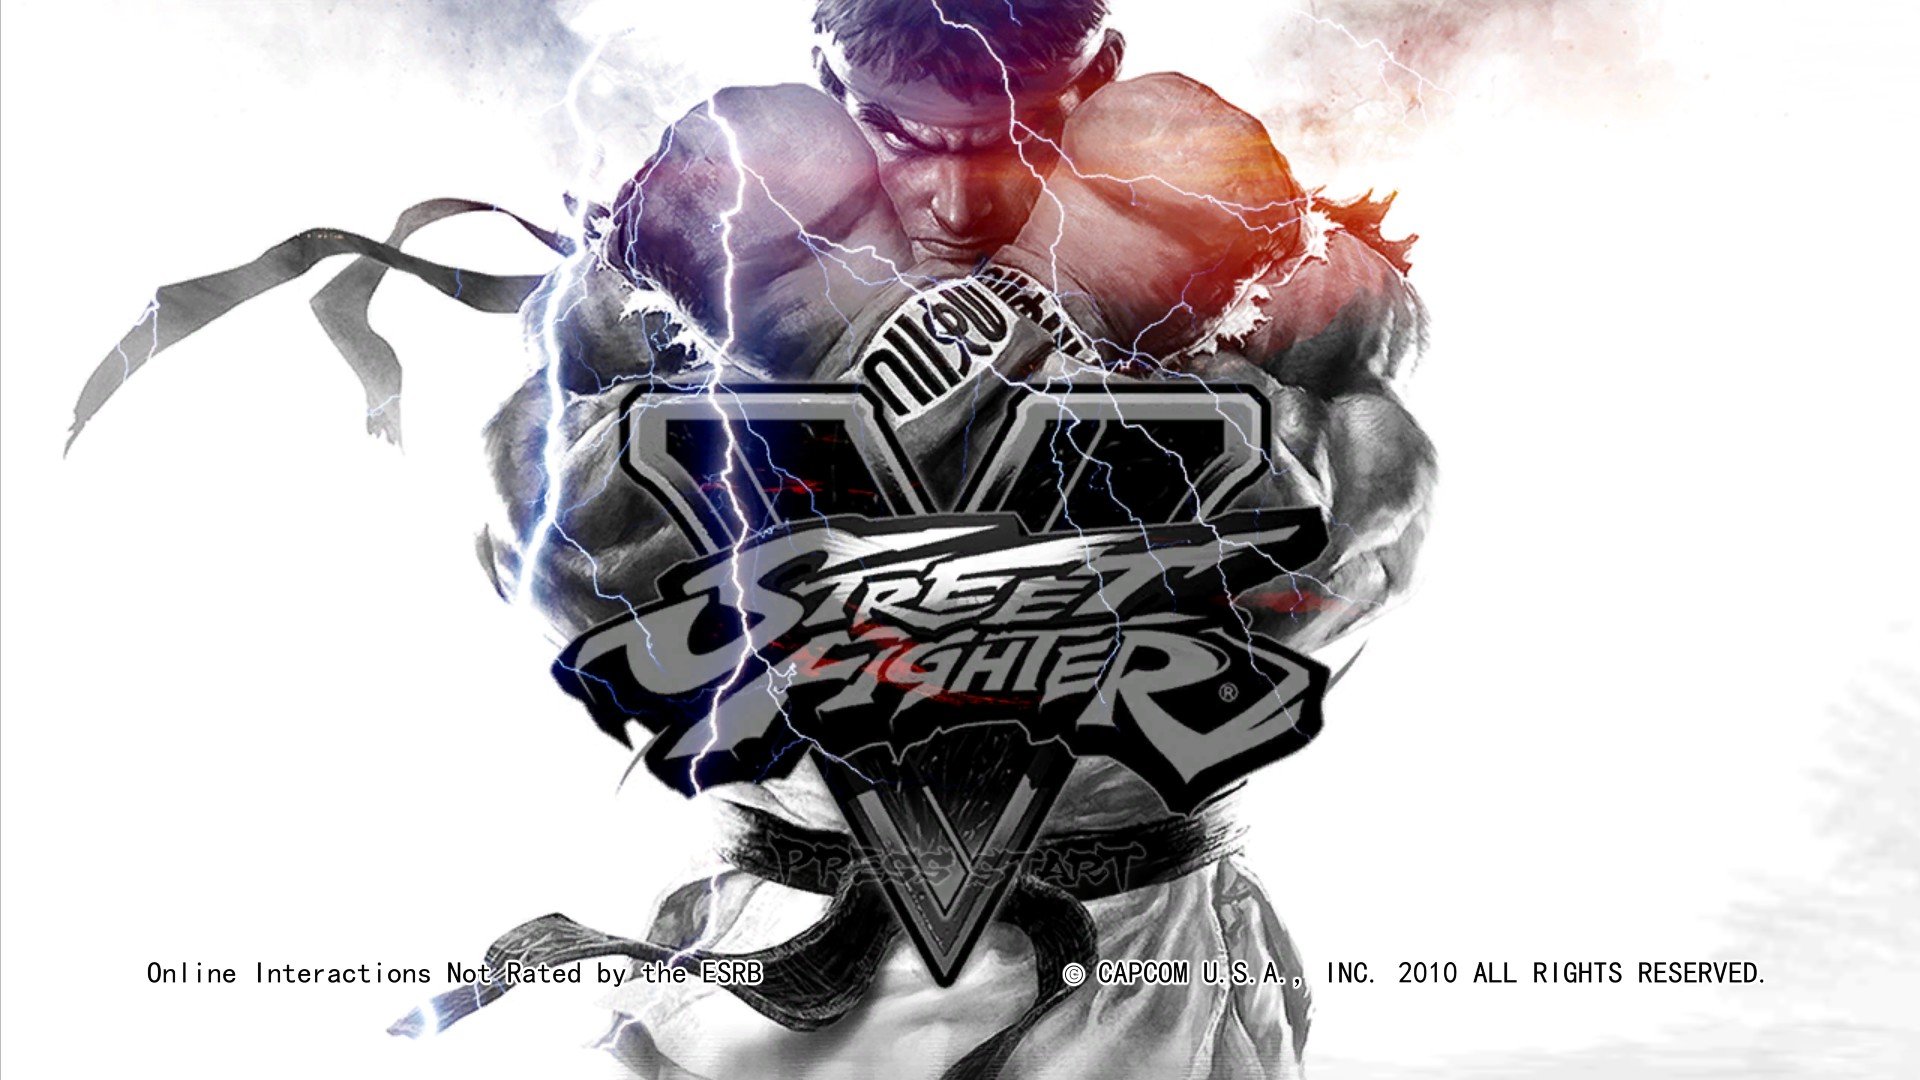 Awesome Street Fighter free wallpaper ID:466421 for full hd 1920x1080 desktop